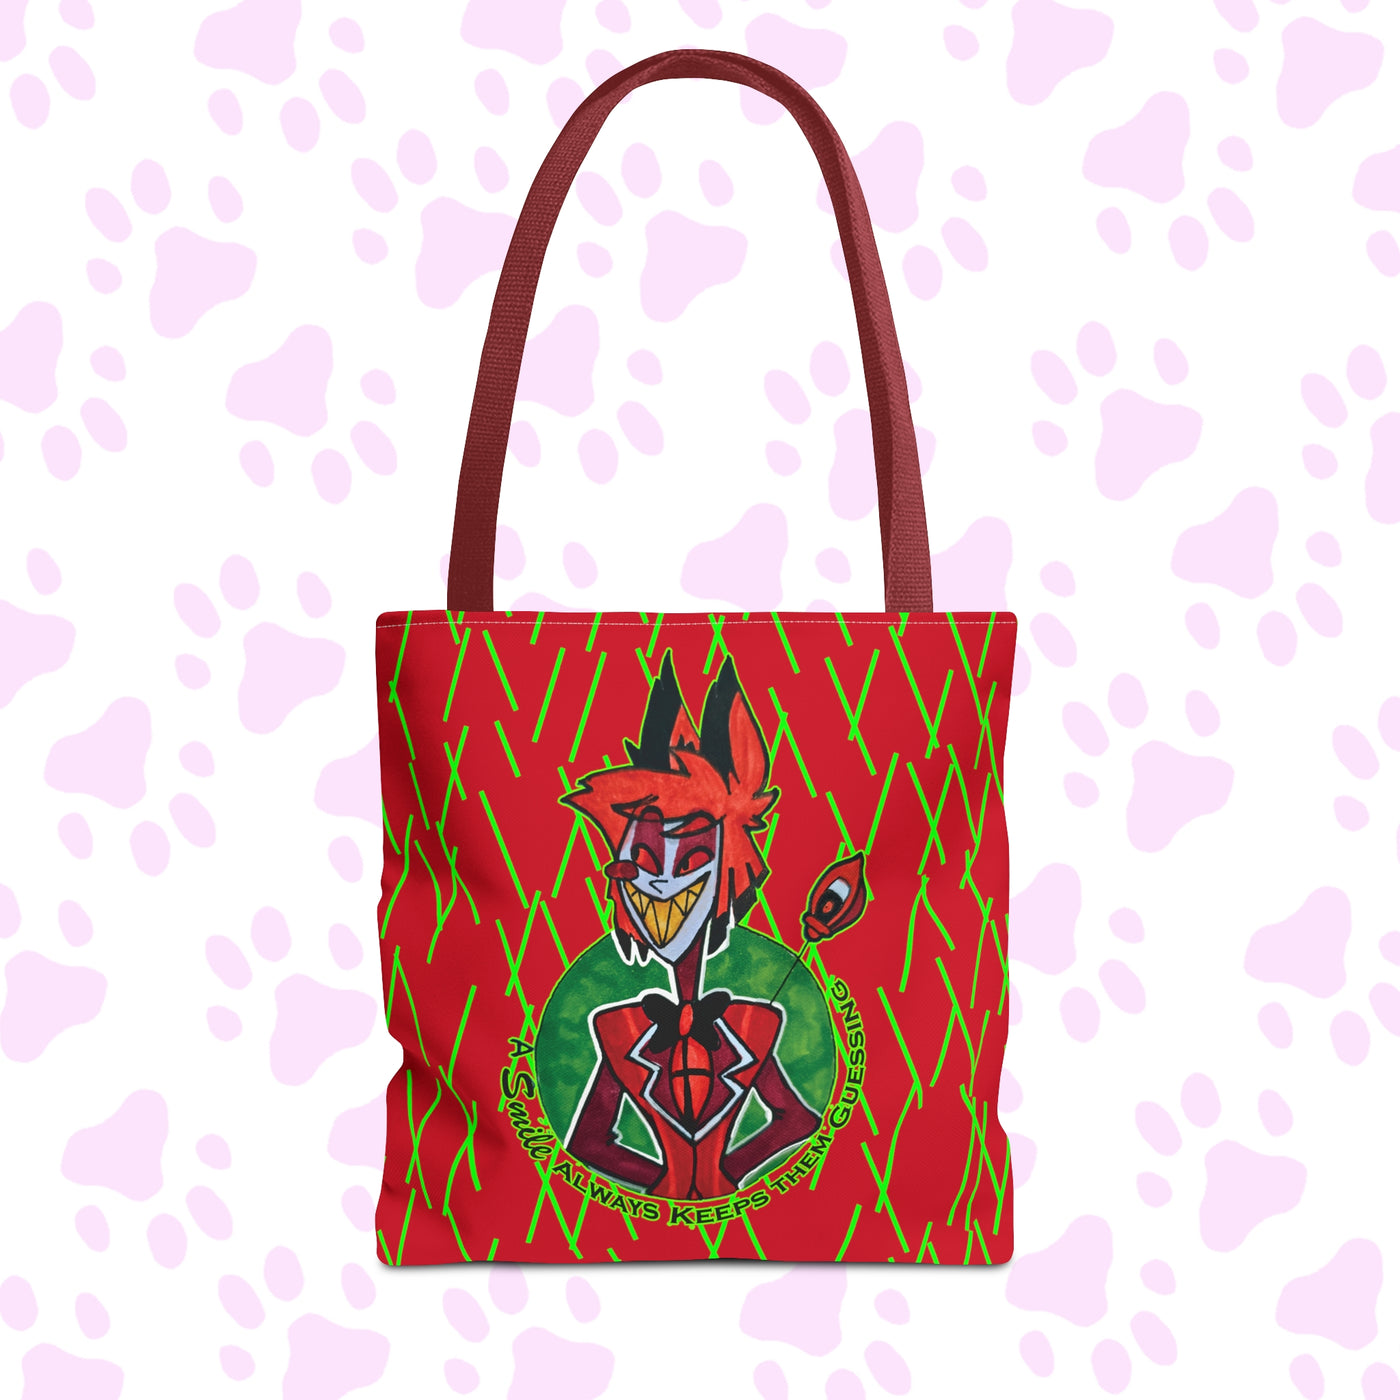 Allistor - A Smile Always Keeps them Guessing Tote Bag (AOP) - Stitches